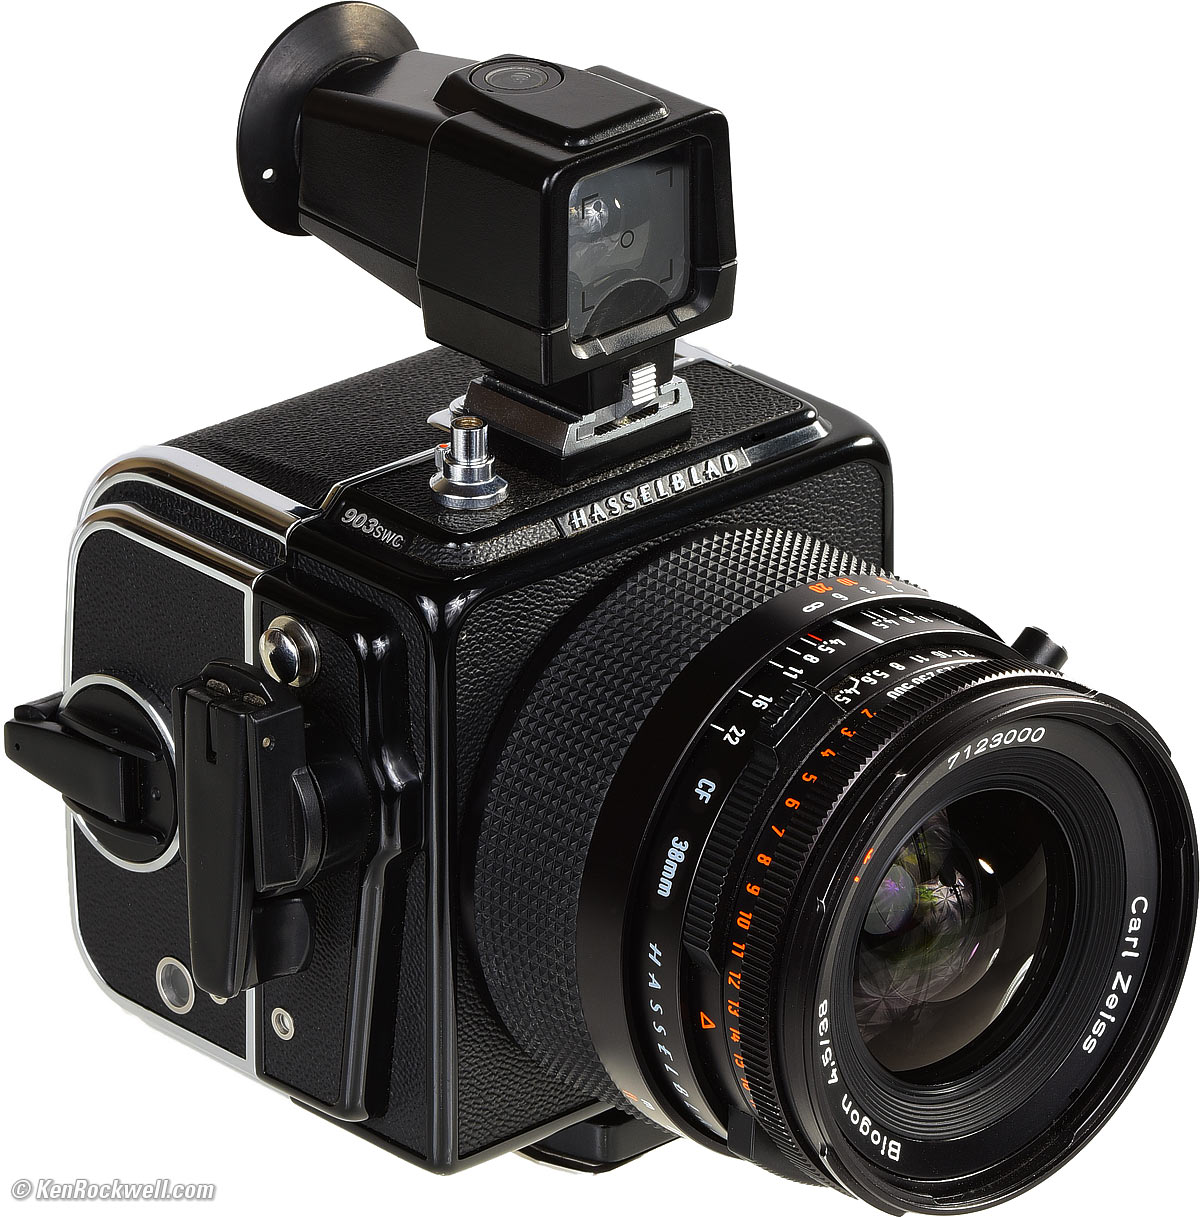 Hasselblad SWC & 903 SWC Review